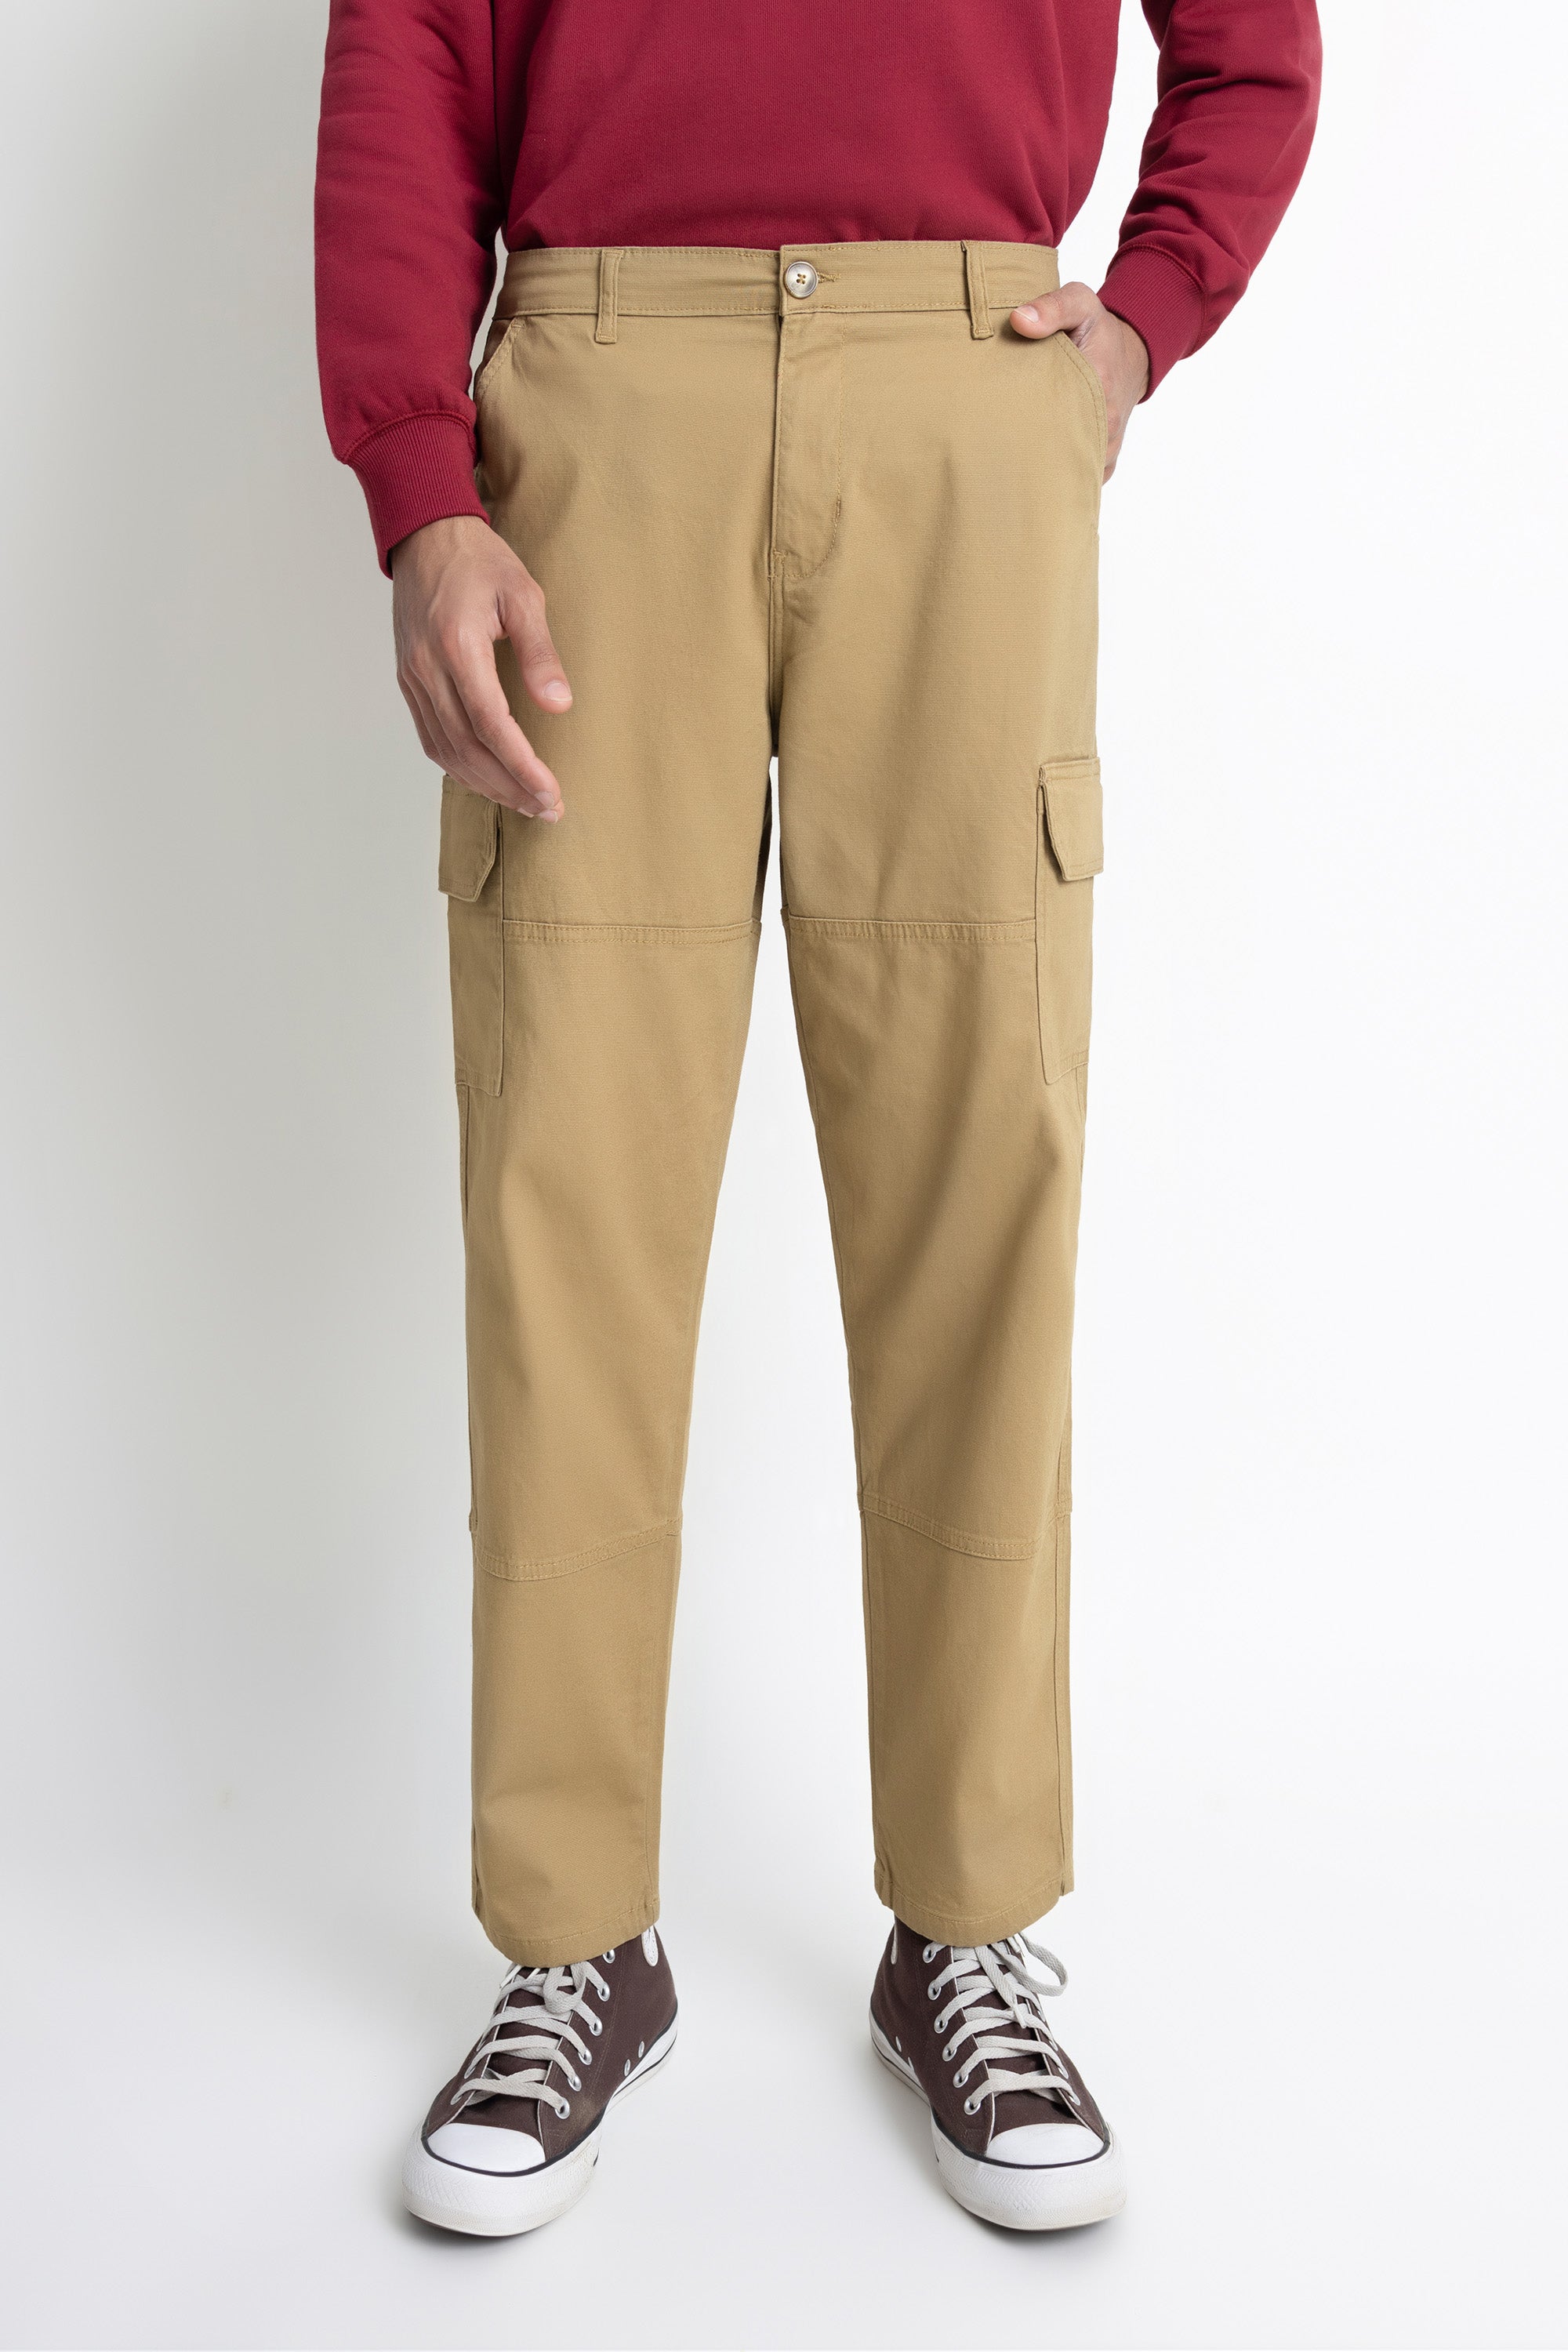 The Navy Blue Cargo Pants –